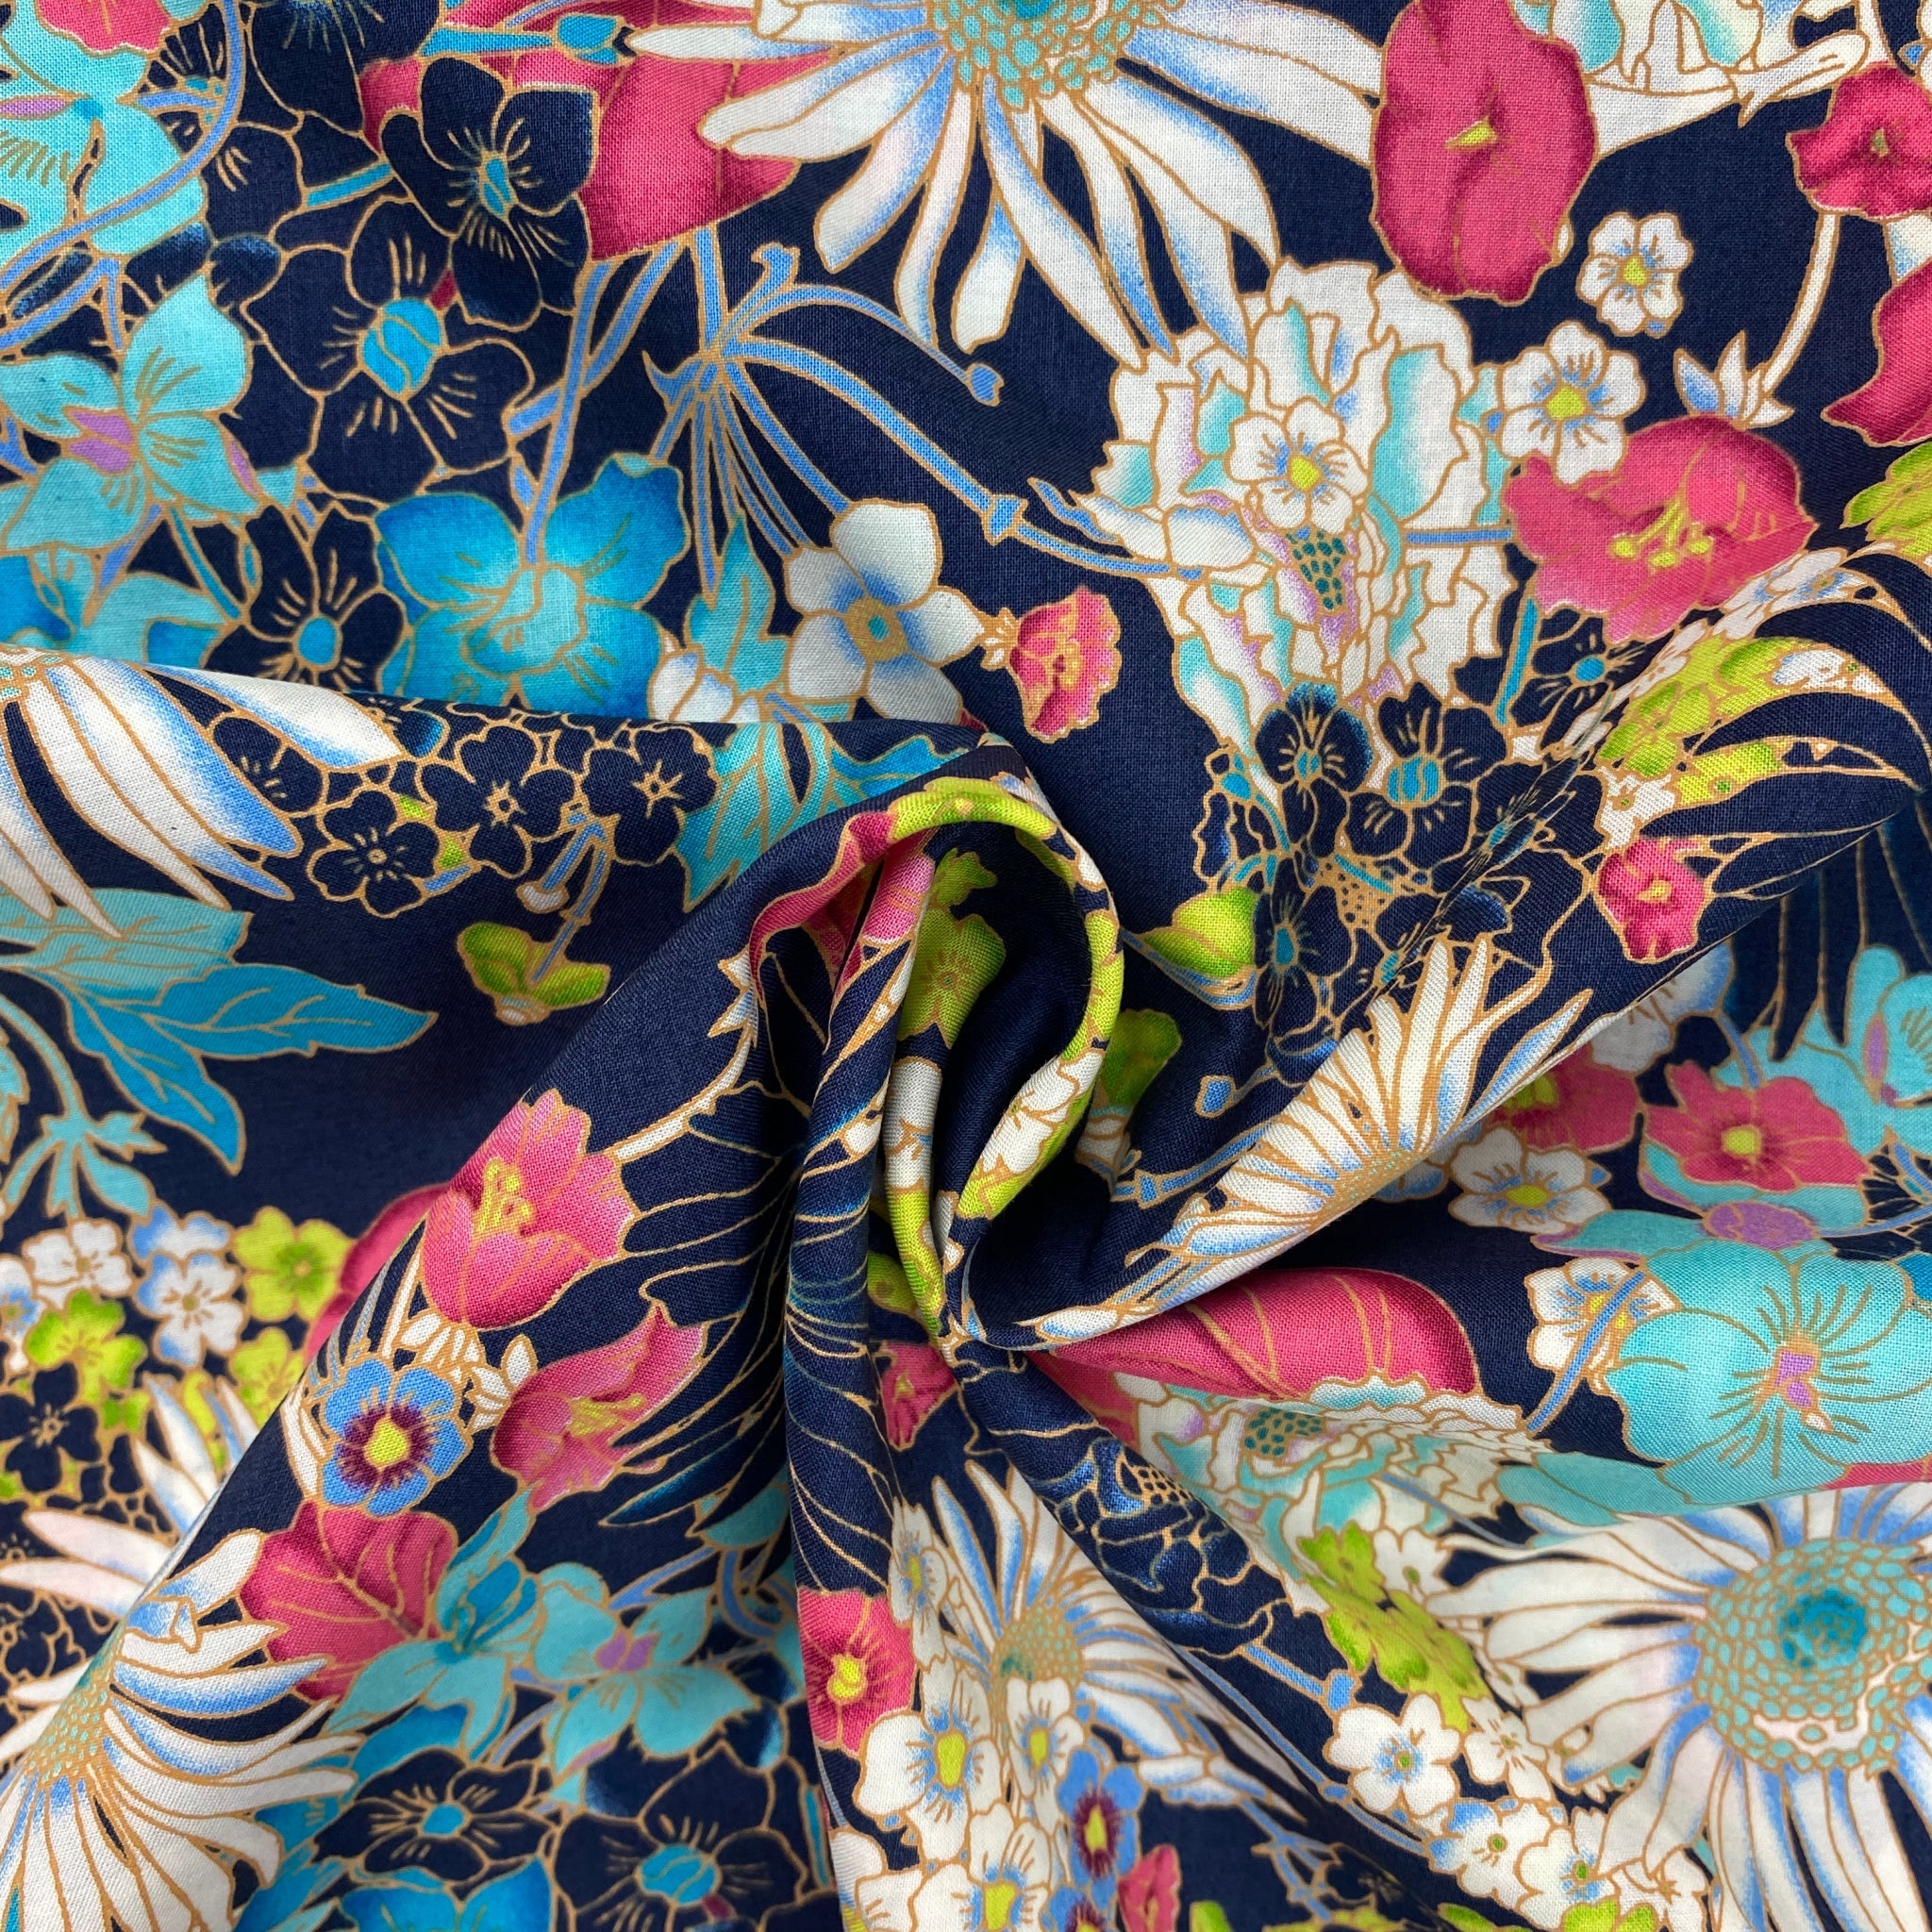 dressmaking fabric, cotton lawn, dark blue background, variety of flowers in barbie pink, apple green, sea blue, white, flowers outlined in a none shine gold. image is displayed flat with a scrunch in the middle.